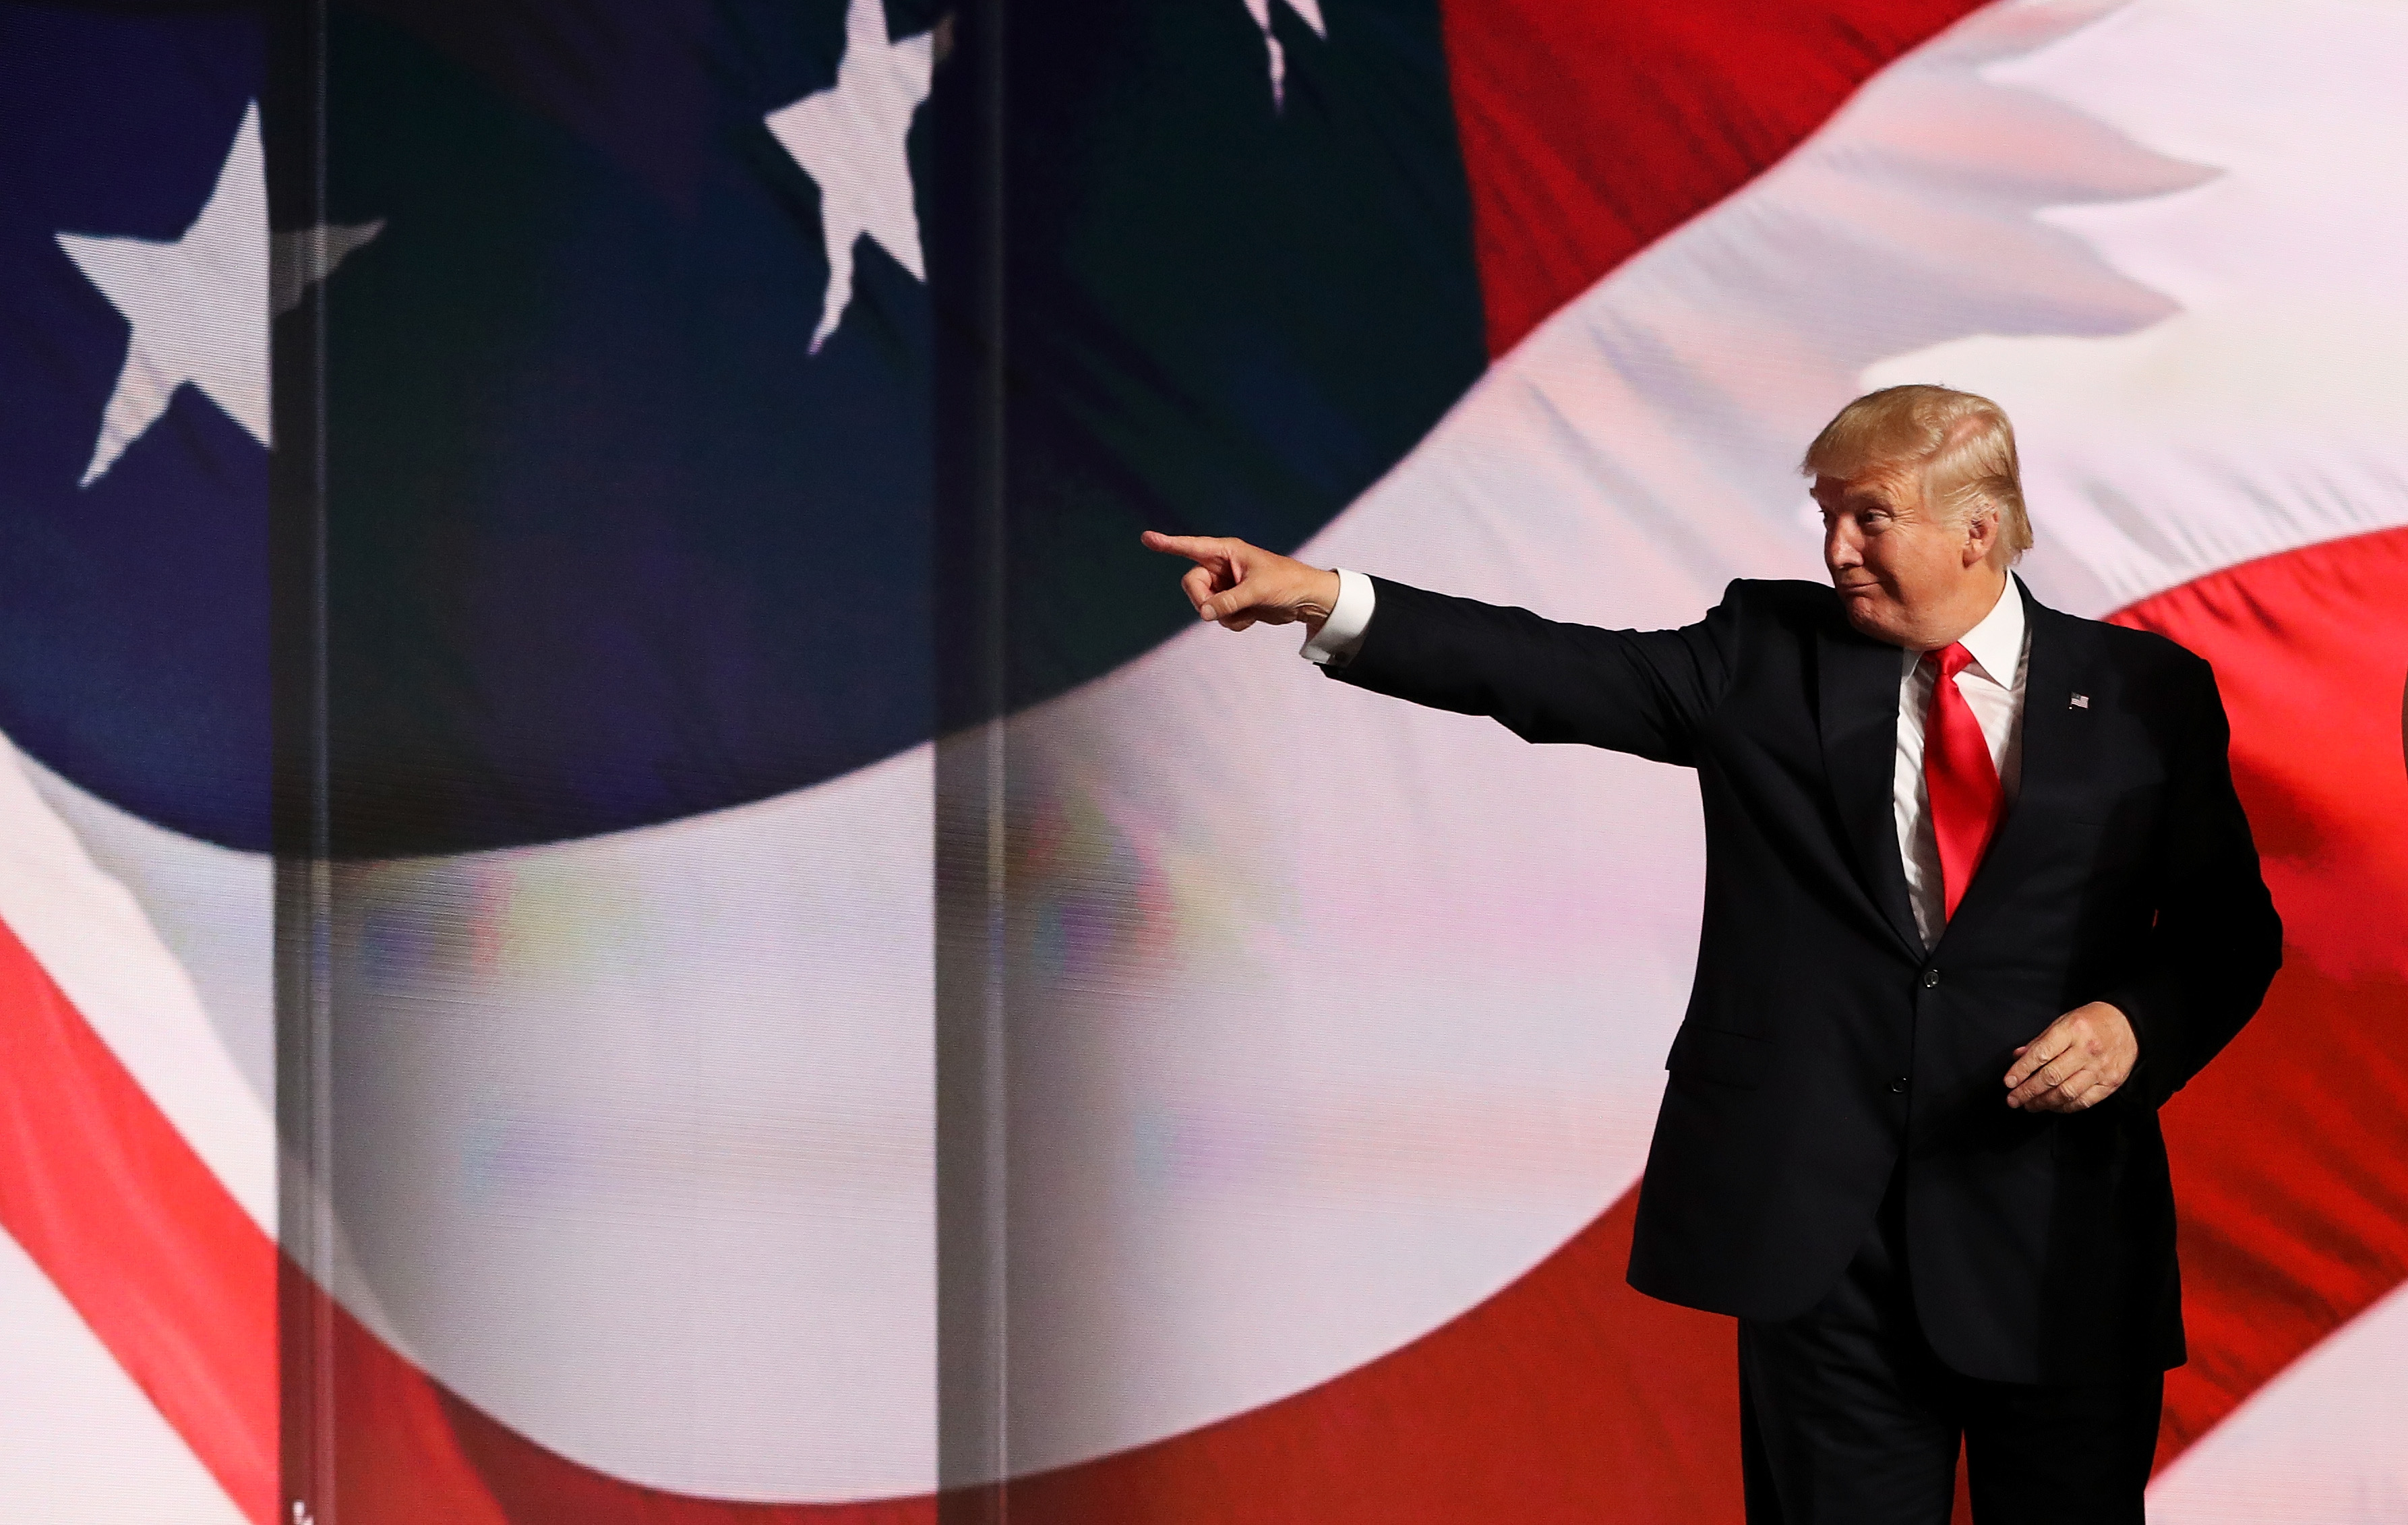 Republican presidential candidate Donald Trump acknowledges the crowd at the end of the Republican National Convention at the Quicken Loans Arena in Cleveland on July 21, 2016. (Joe Raedle—Getty Images)